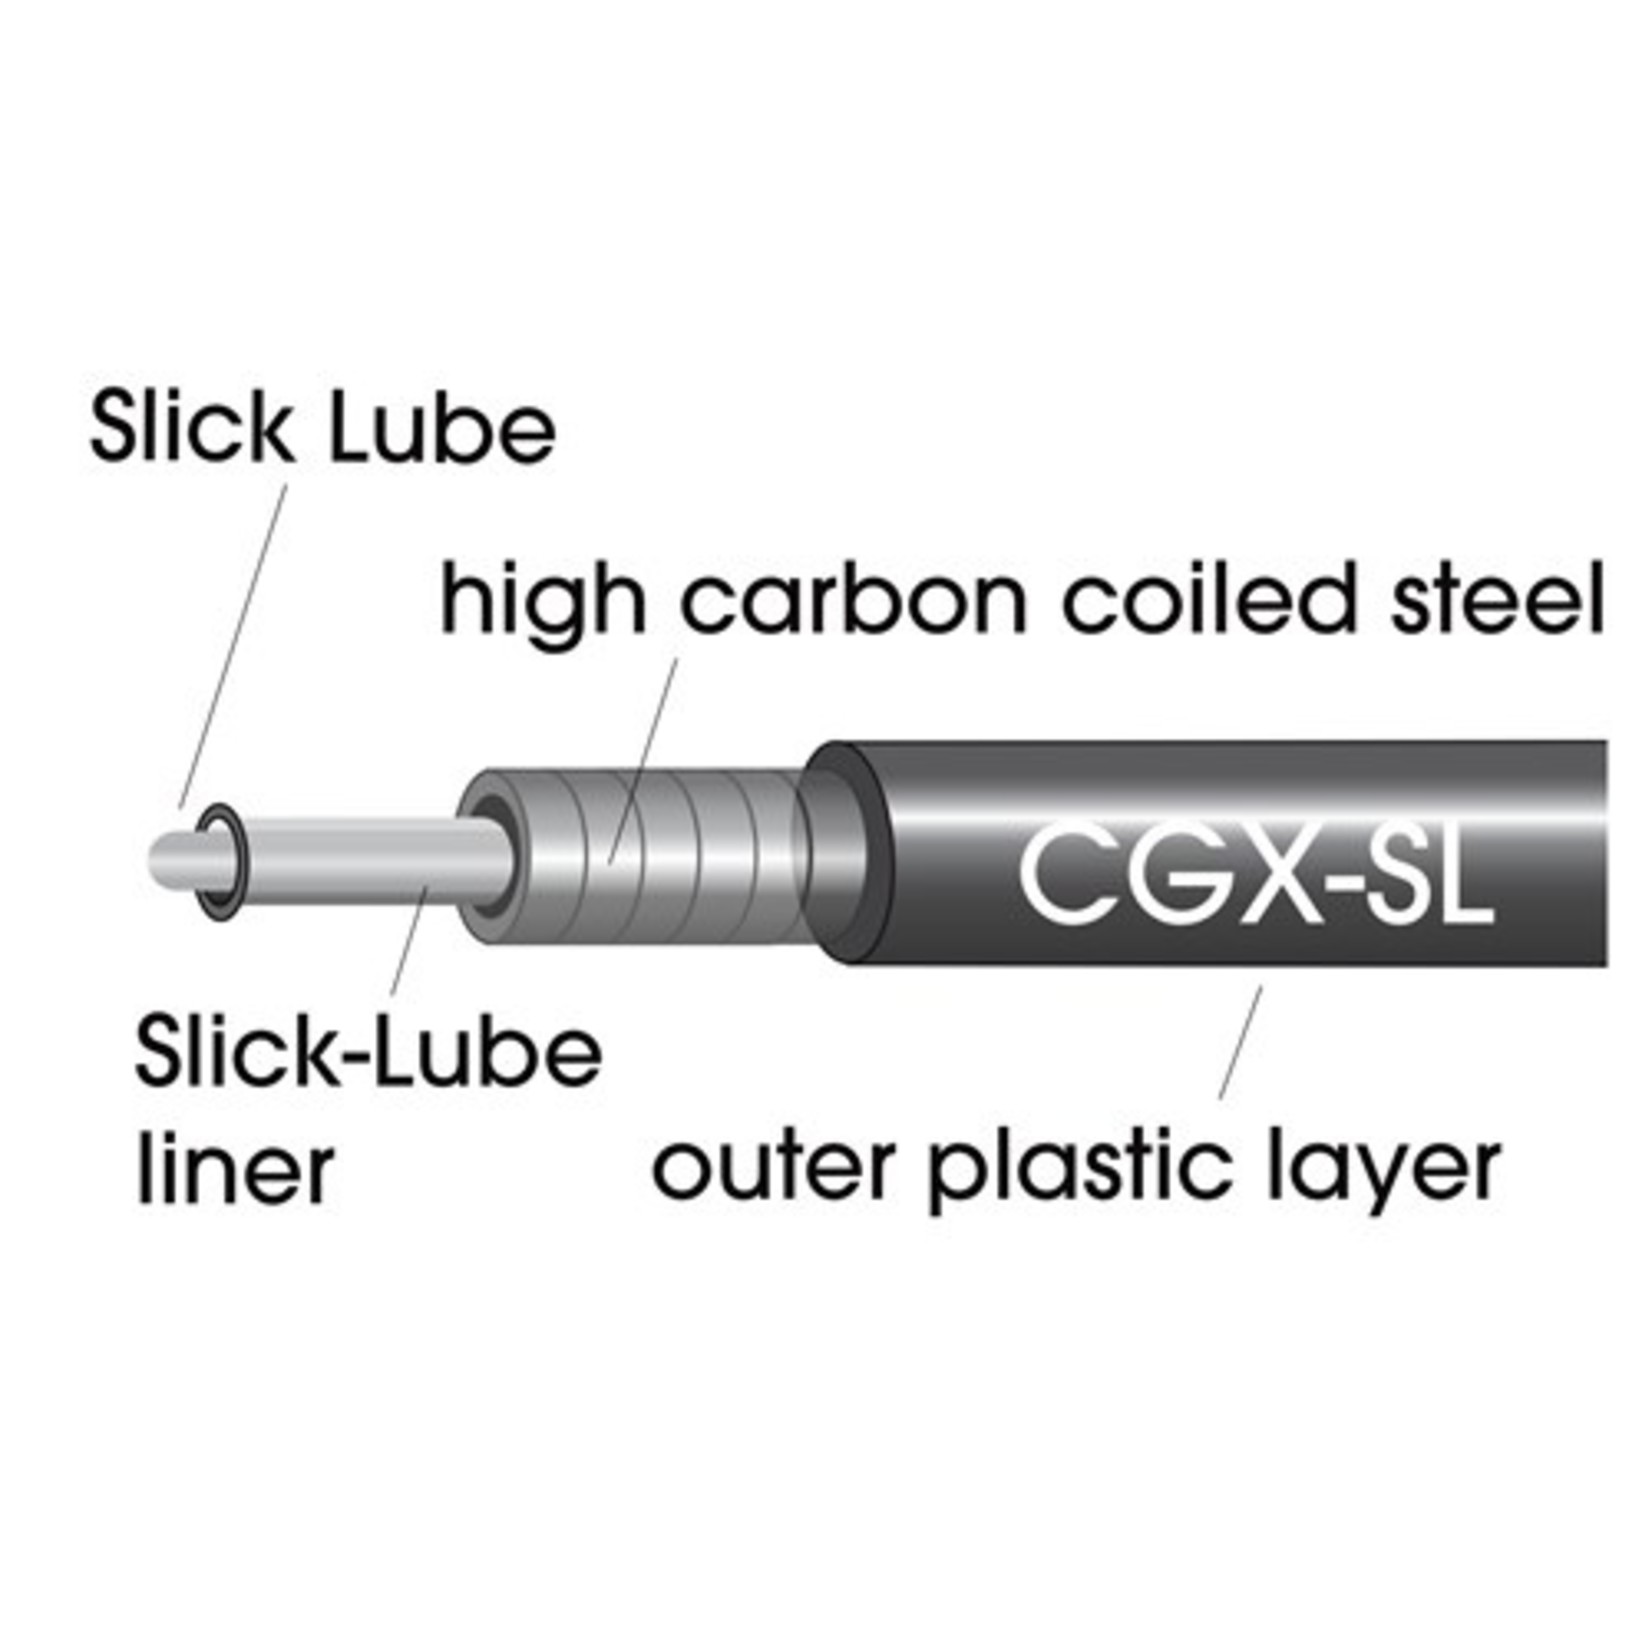 Jagwire Jagwire Outer Brake Carbon Casing Slick Lube Liner Steel CGX-SL - Black